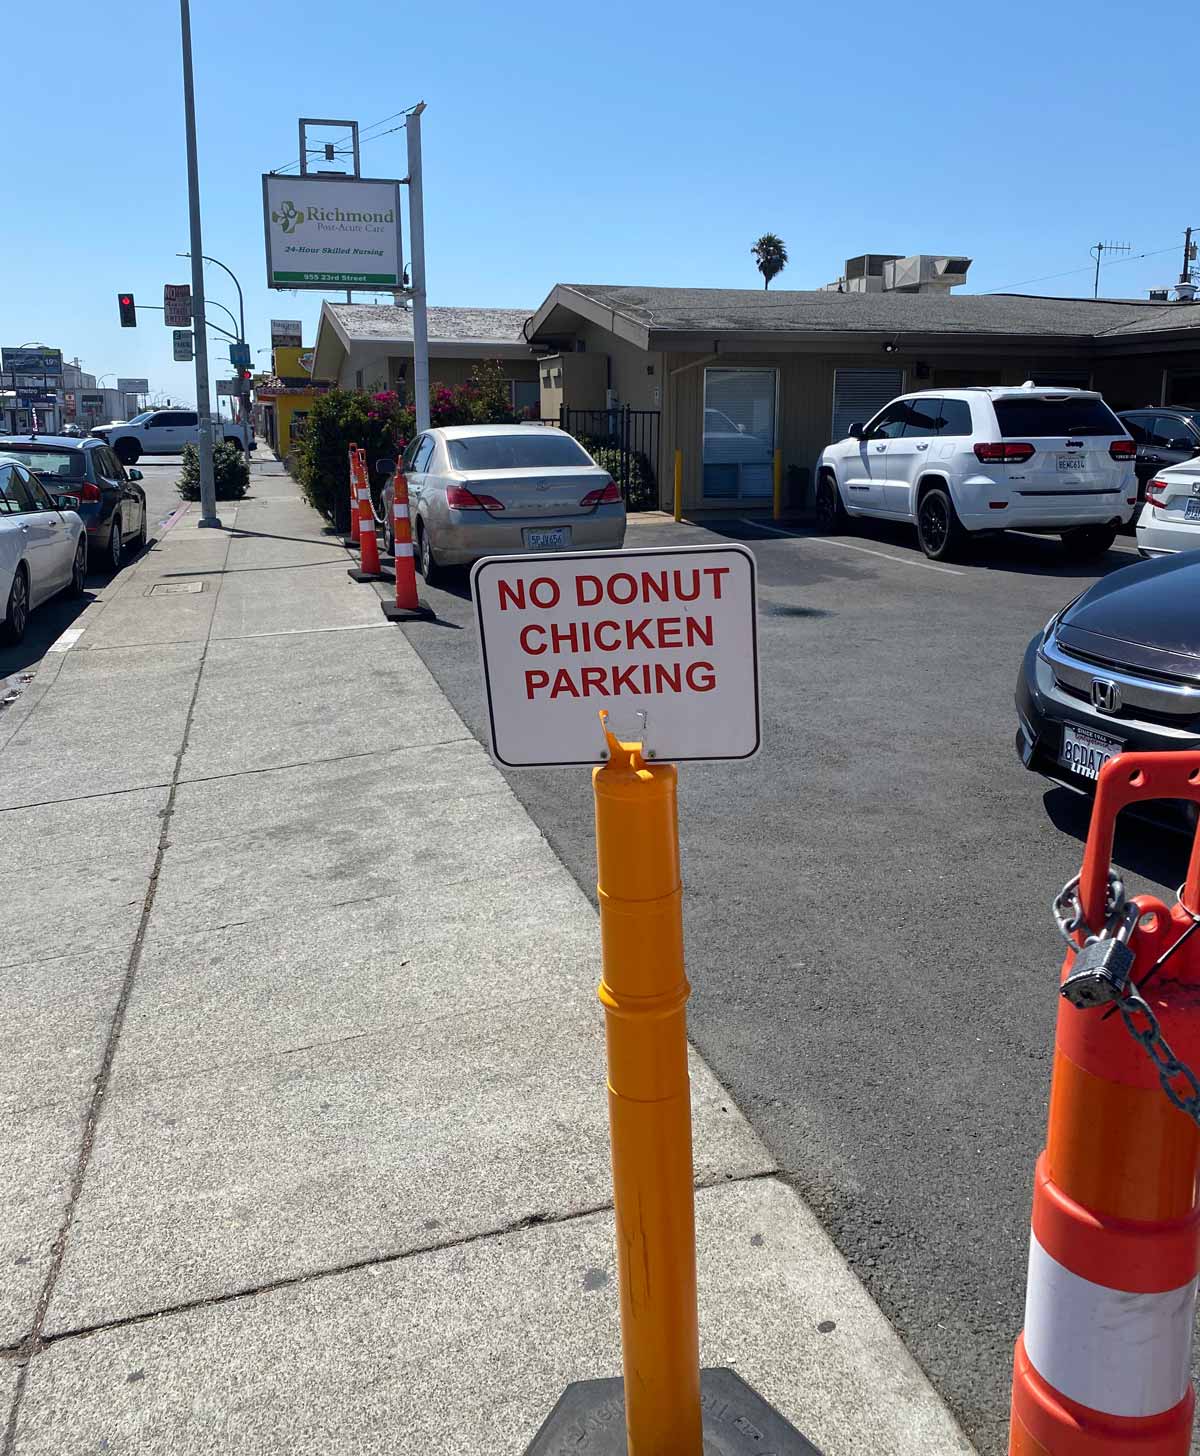 All others may park here